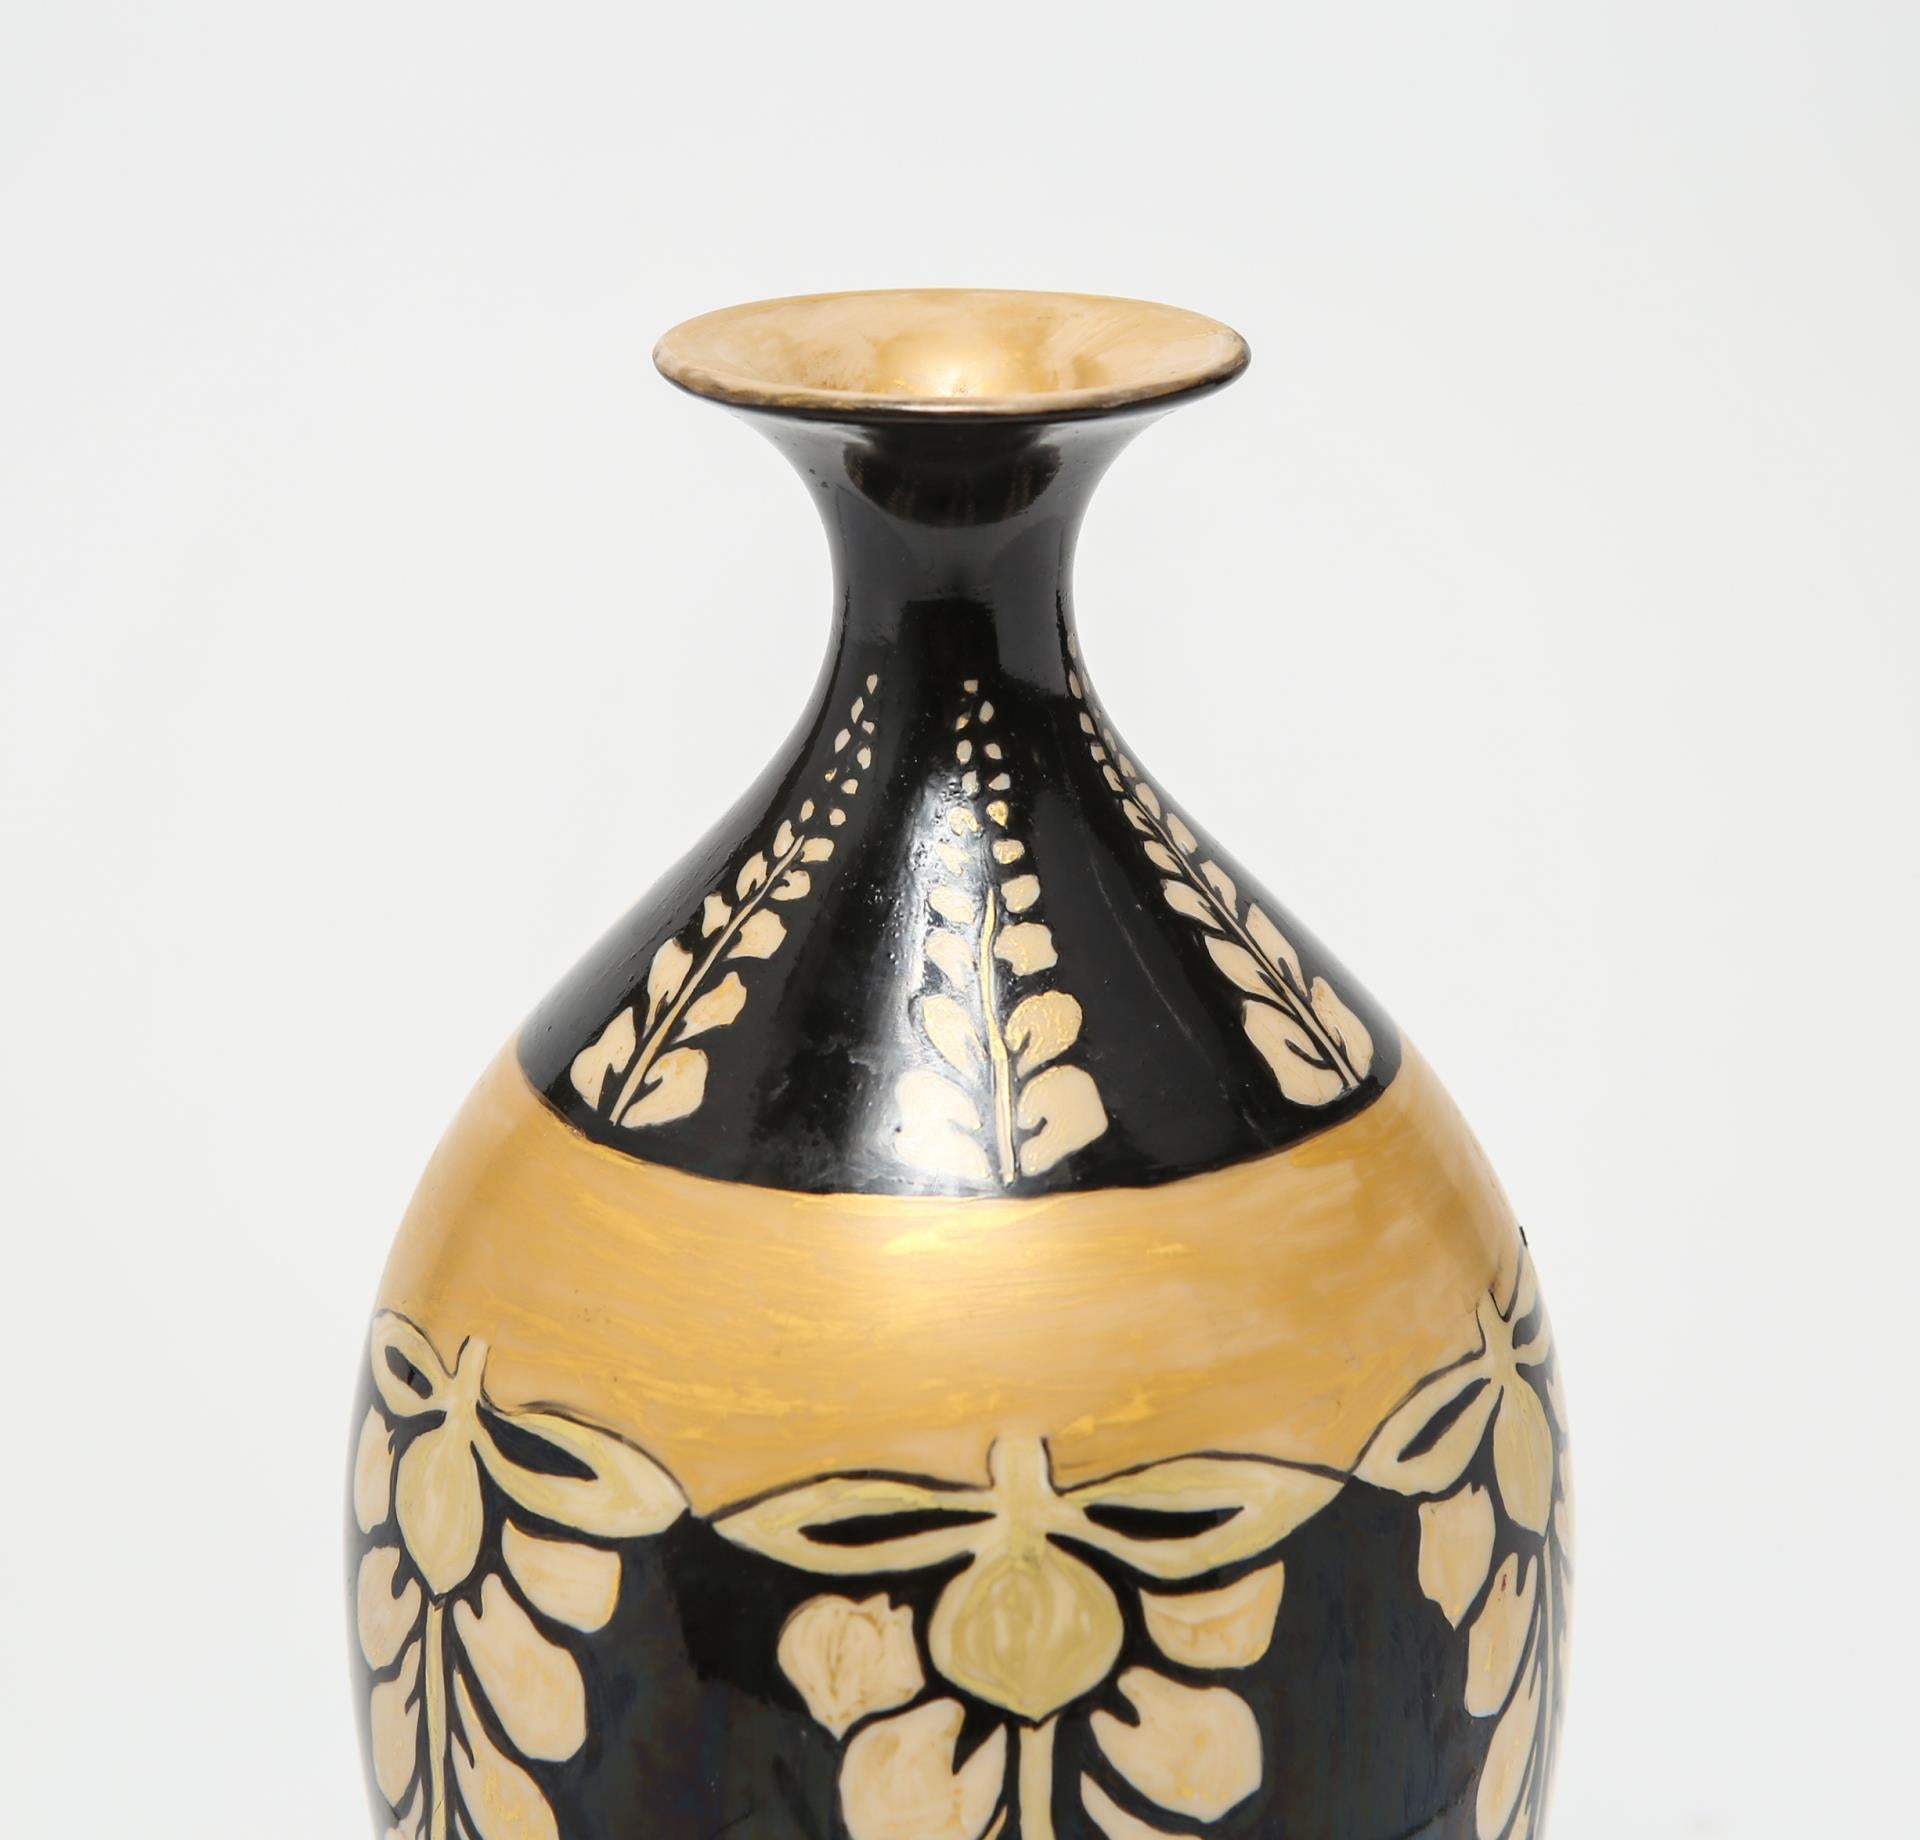 American Belleek vase in black with hand-painted gold and cream wisteria motif and a 1894-1906 mark on the underside, from the Walter Scott Lenox Ceramic Art Company, Trenton, NJ. The piece has a slight hairline crack on the lip.